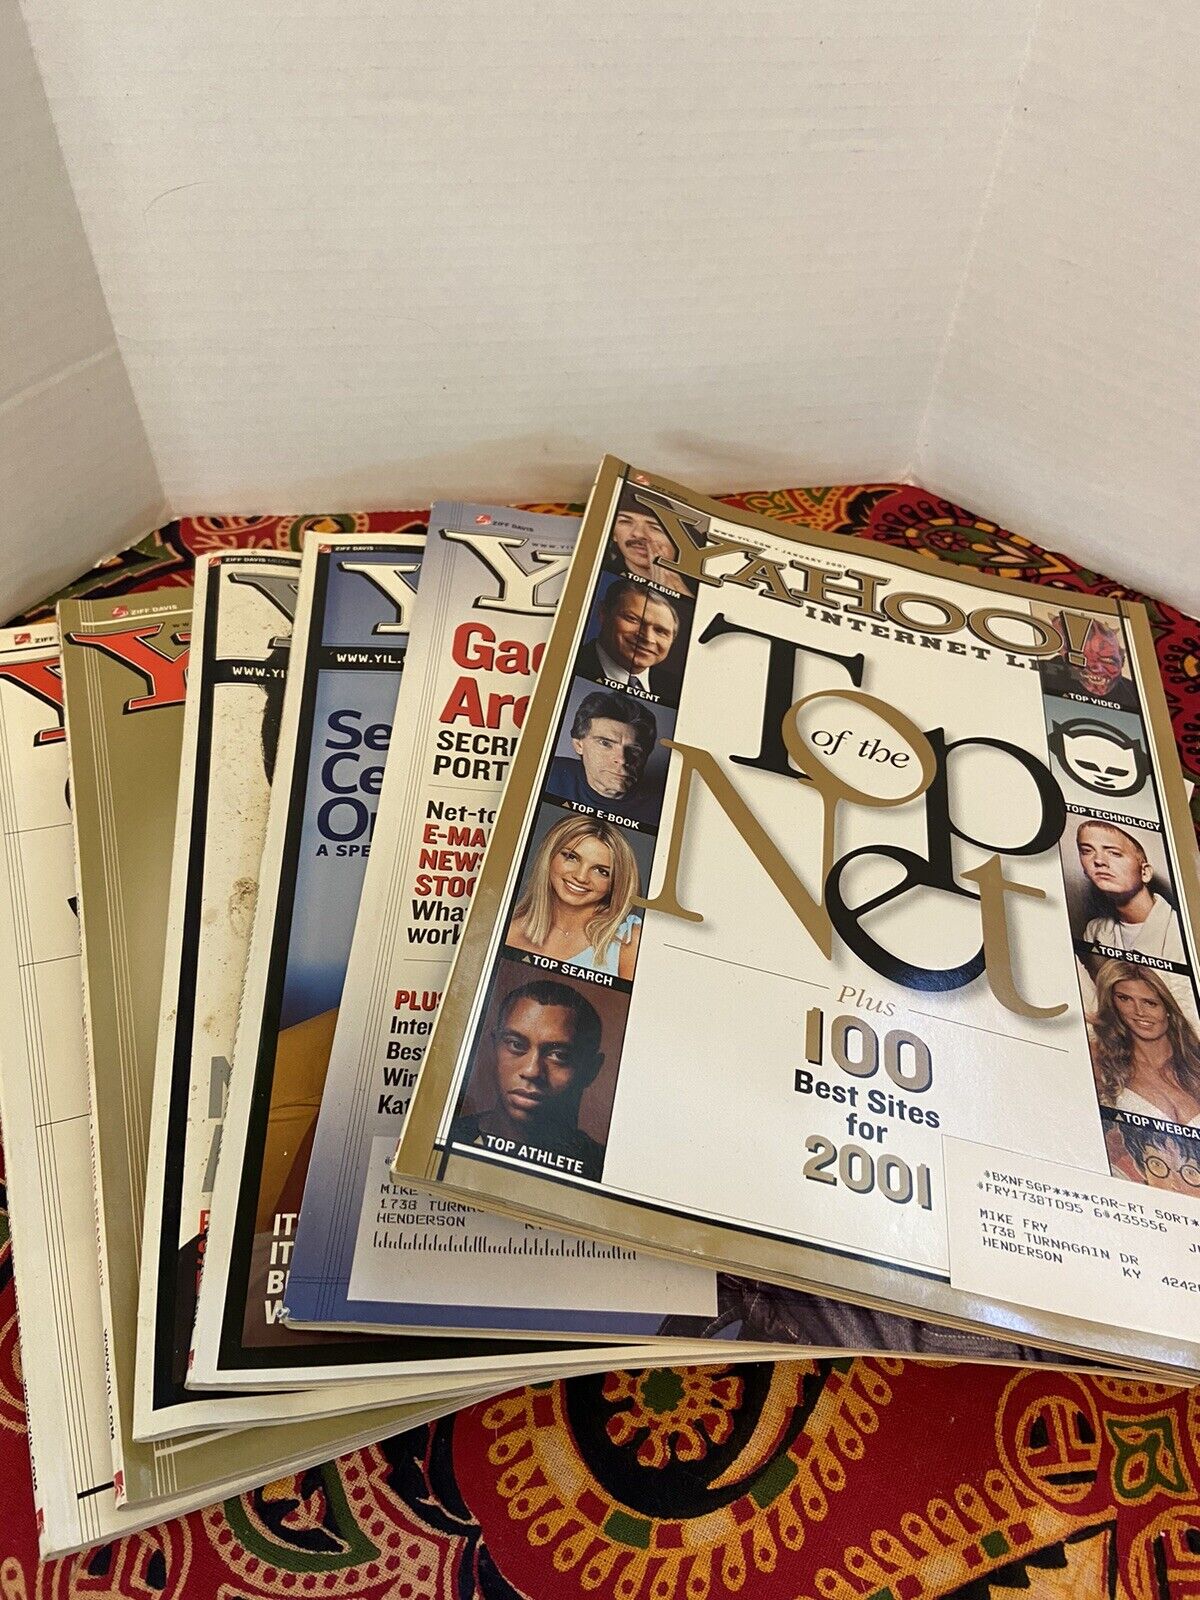 Yahoo Internet Life Vintage Computer Internet Magazines Lot of 6 Early 2000’s